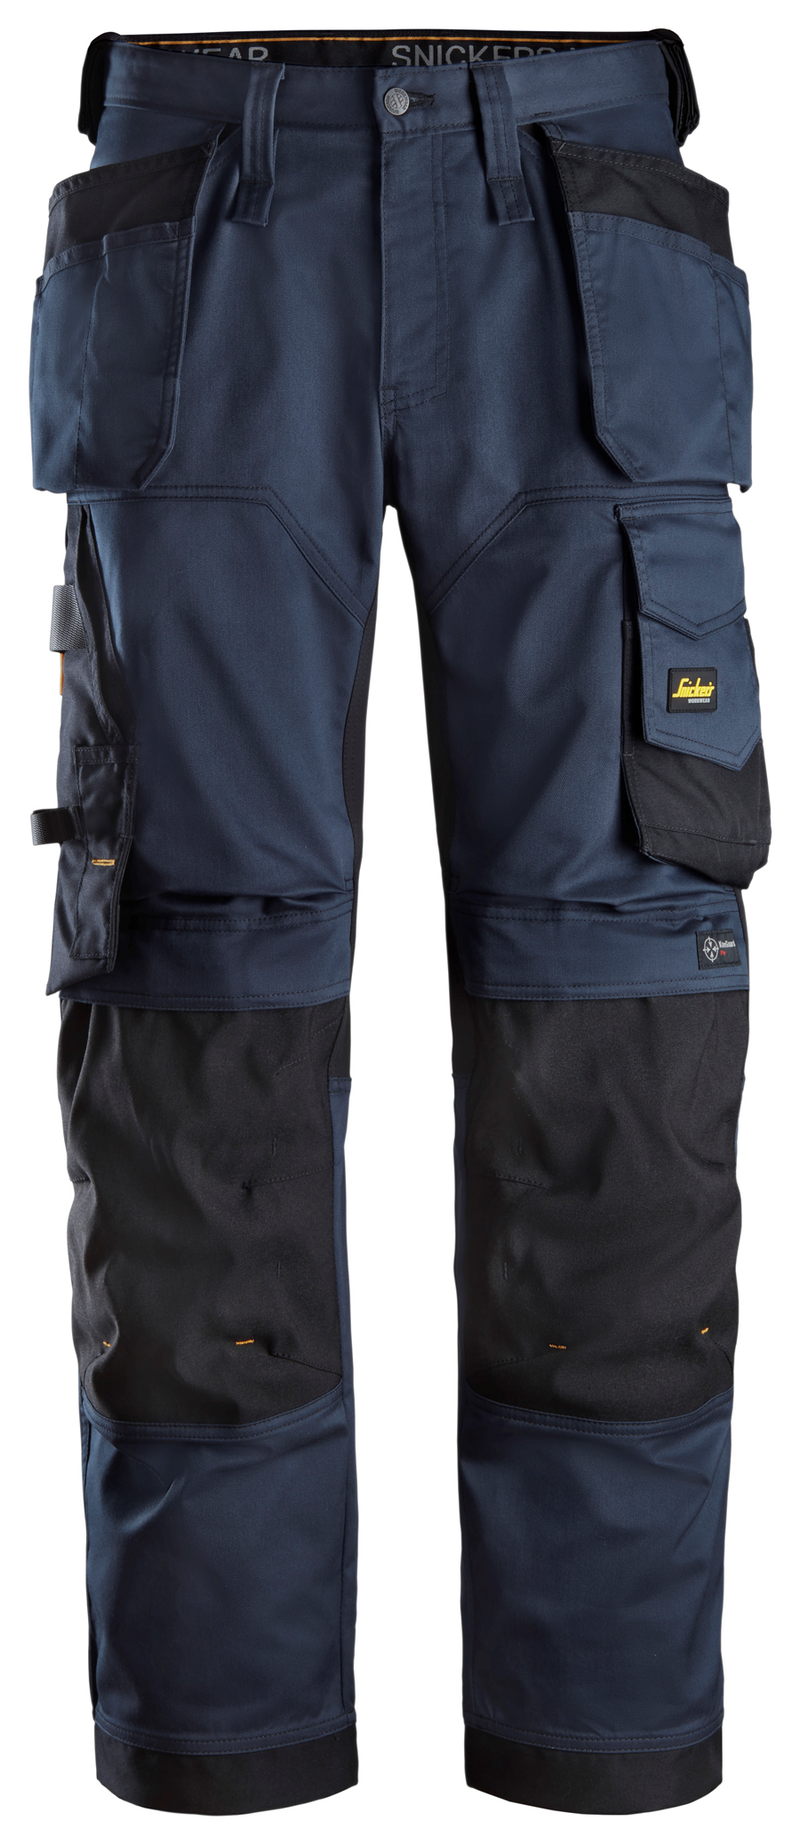 Snickers Workwear U6251 AllroundWork Stretch Loose Fit Work Pants + Holster Pockets - Navy/Black